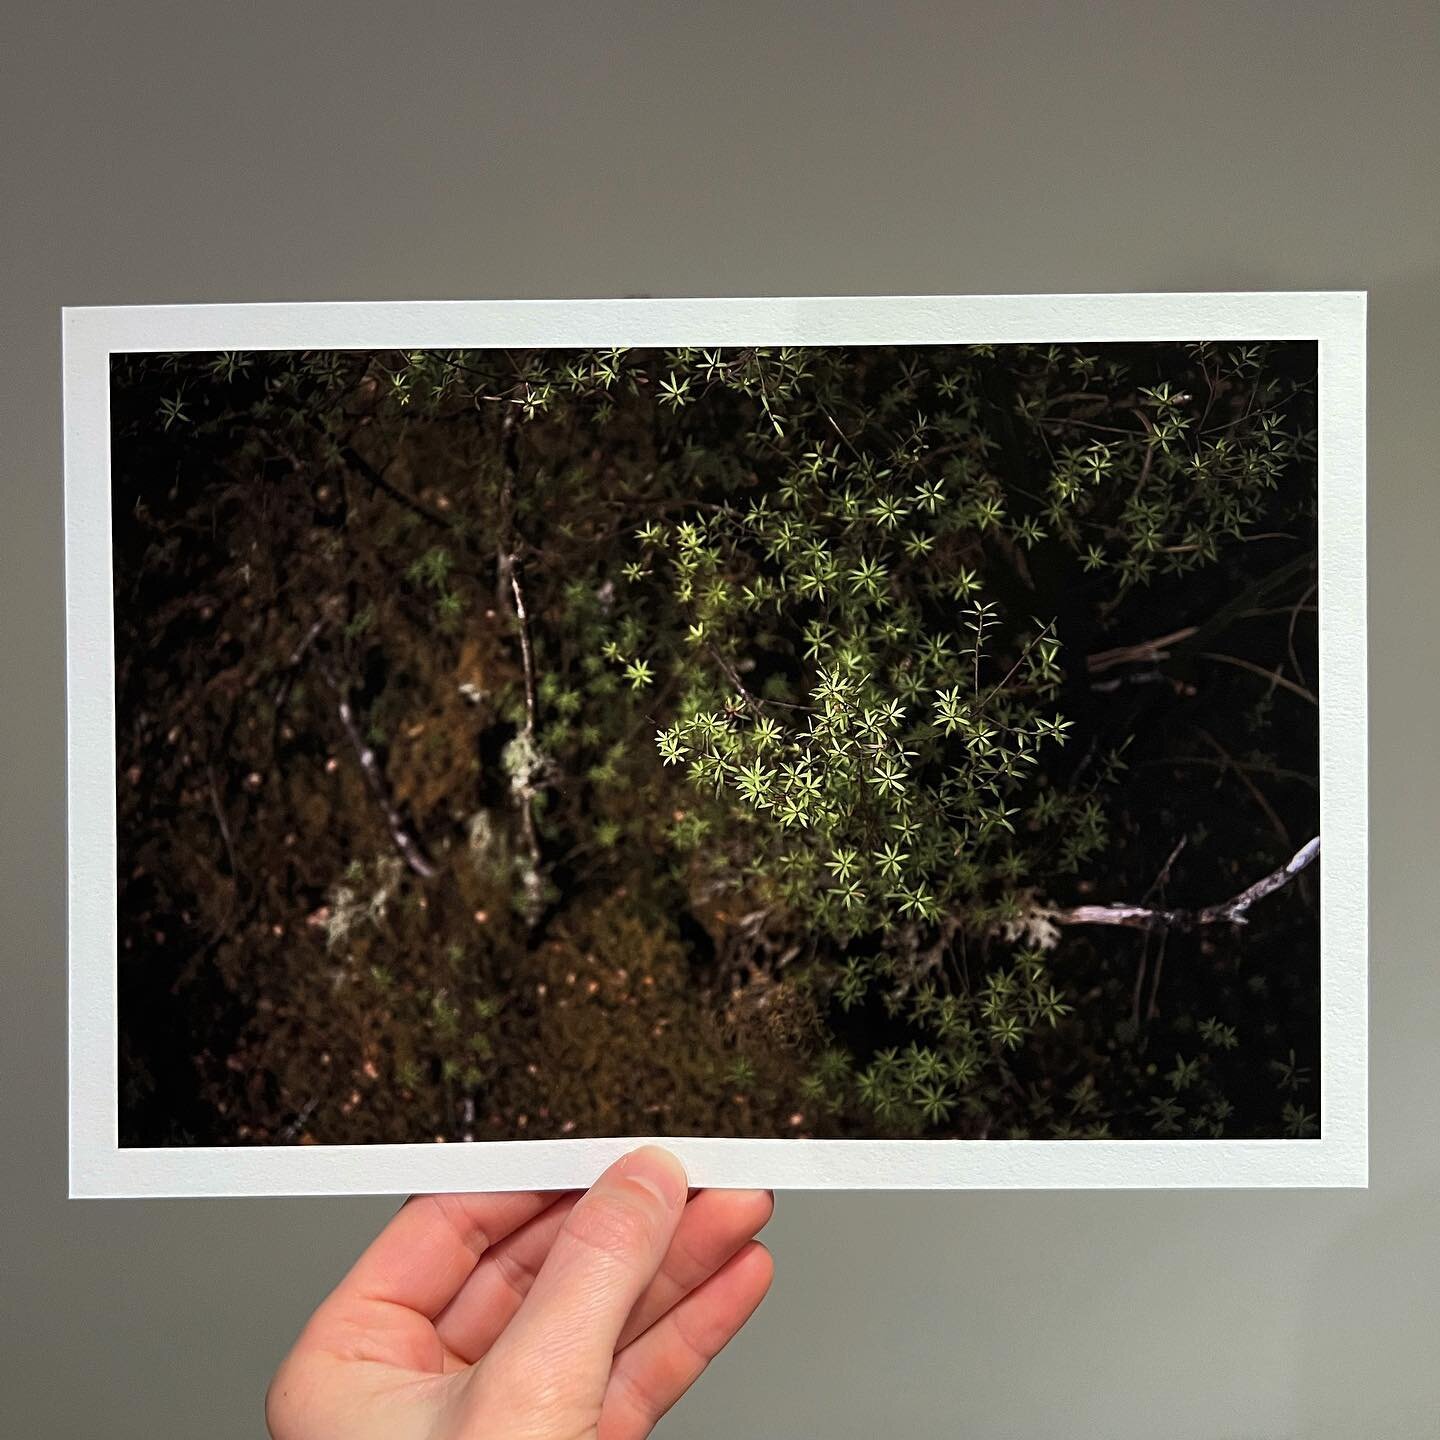 🌱 This will always be one of my favorite photos of mine, and I love the 10&rdquo; x 7&rdquo; edition. It allows for a close and private viewing experience. The leaves remind me of little stars, except they&rsquo;re green and on the forest floor.

Th